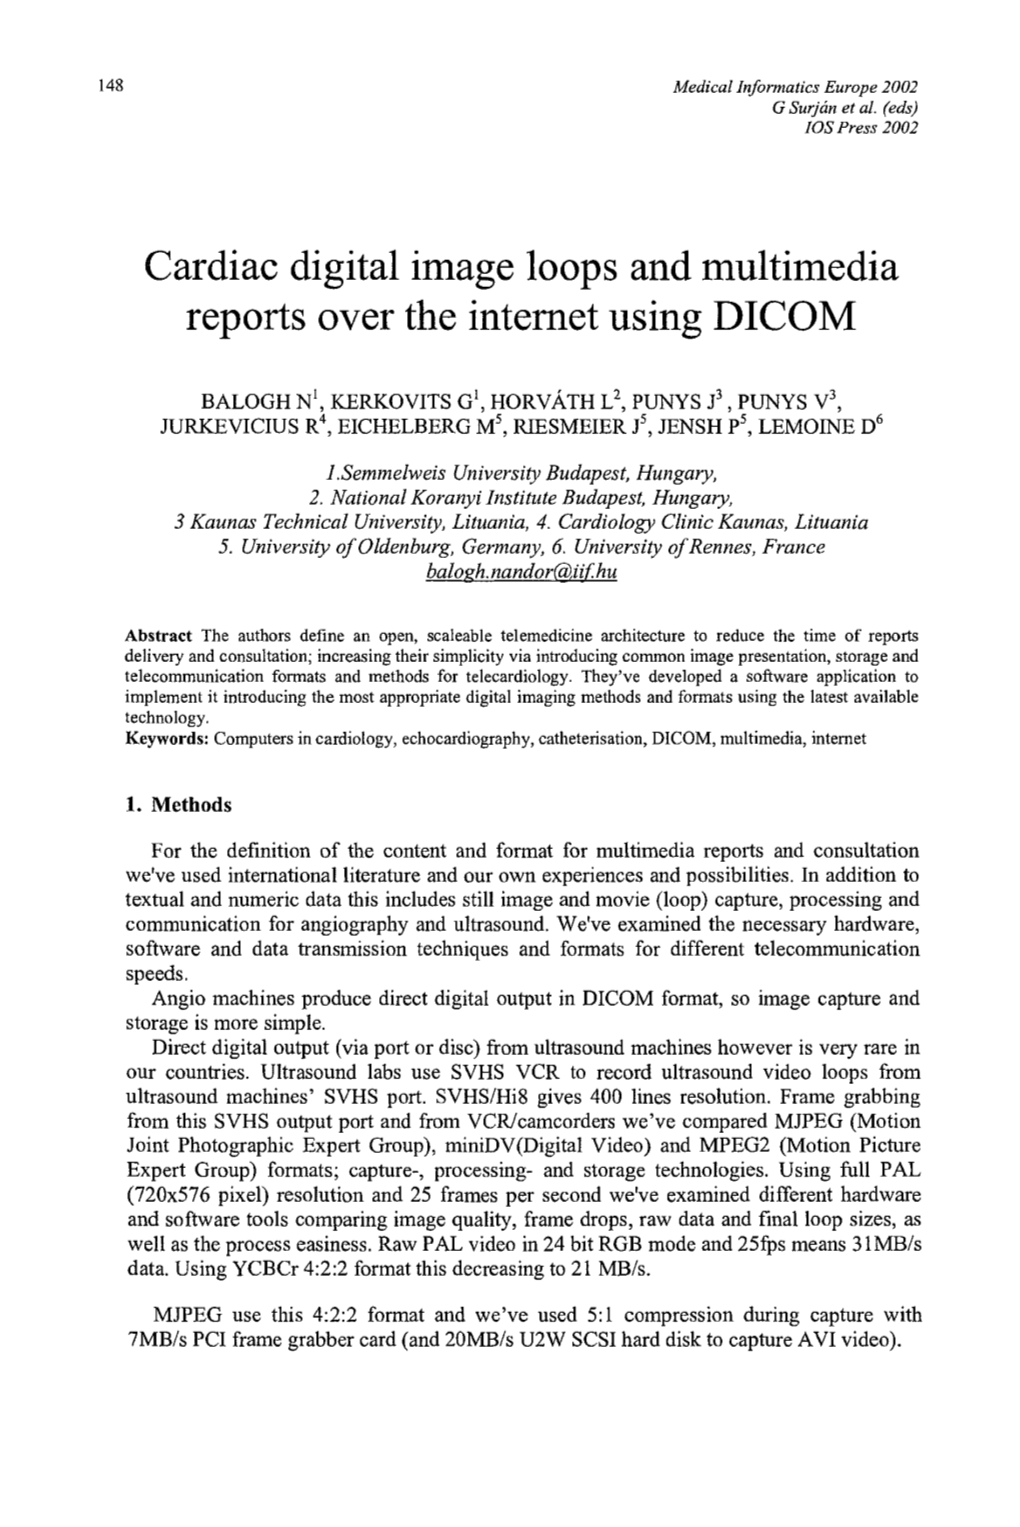 Cardiac Digital Image Loops and Multimedia Reports Over the Internet Using DICOM